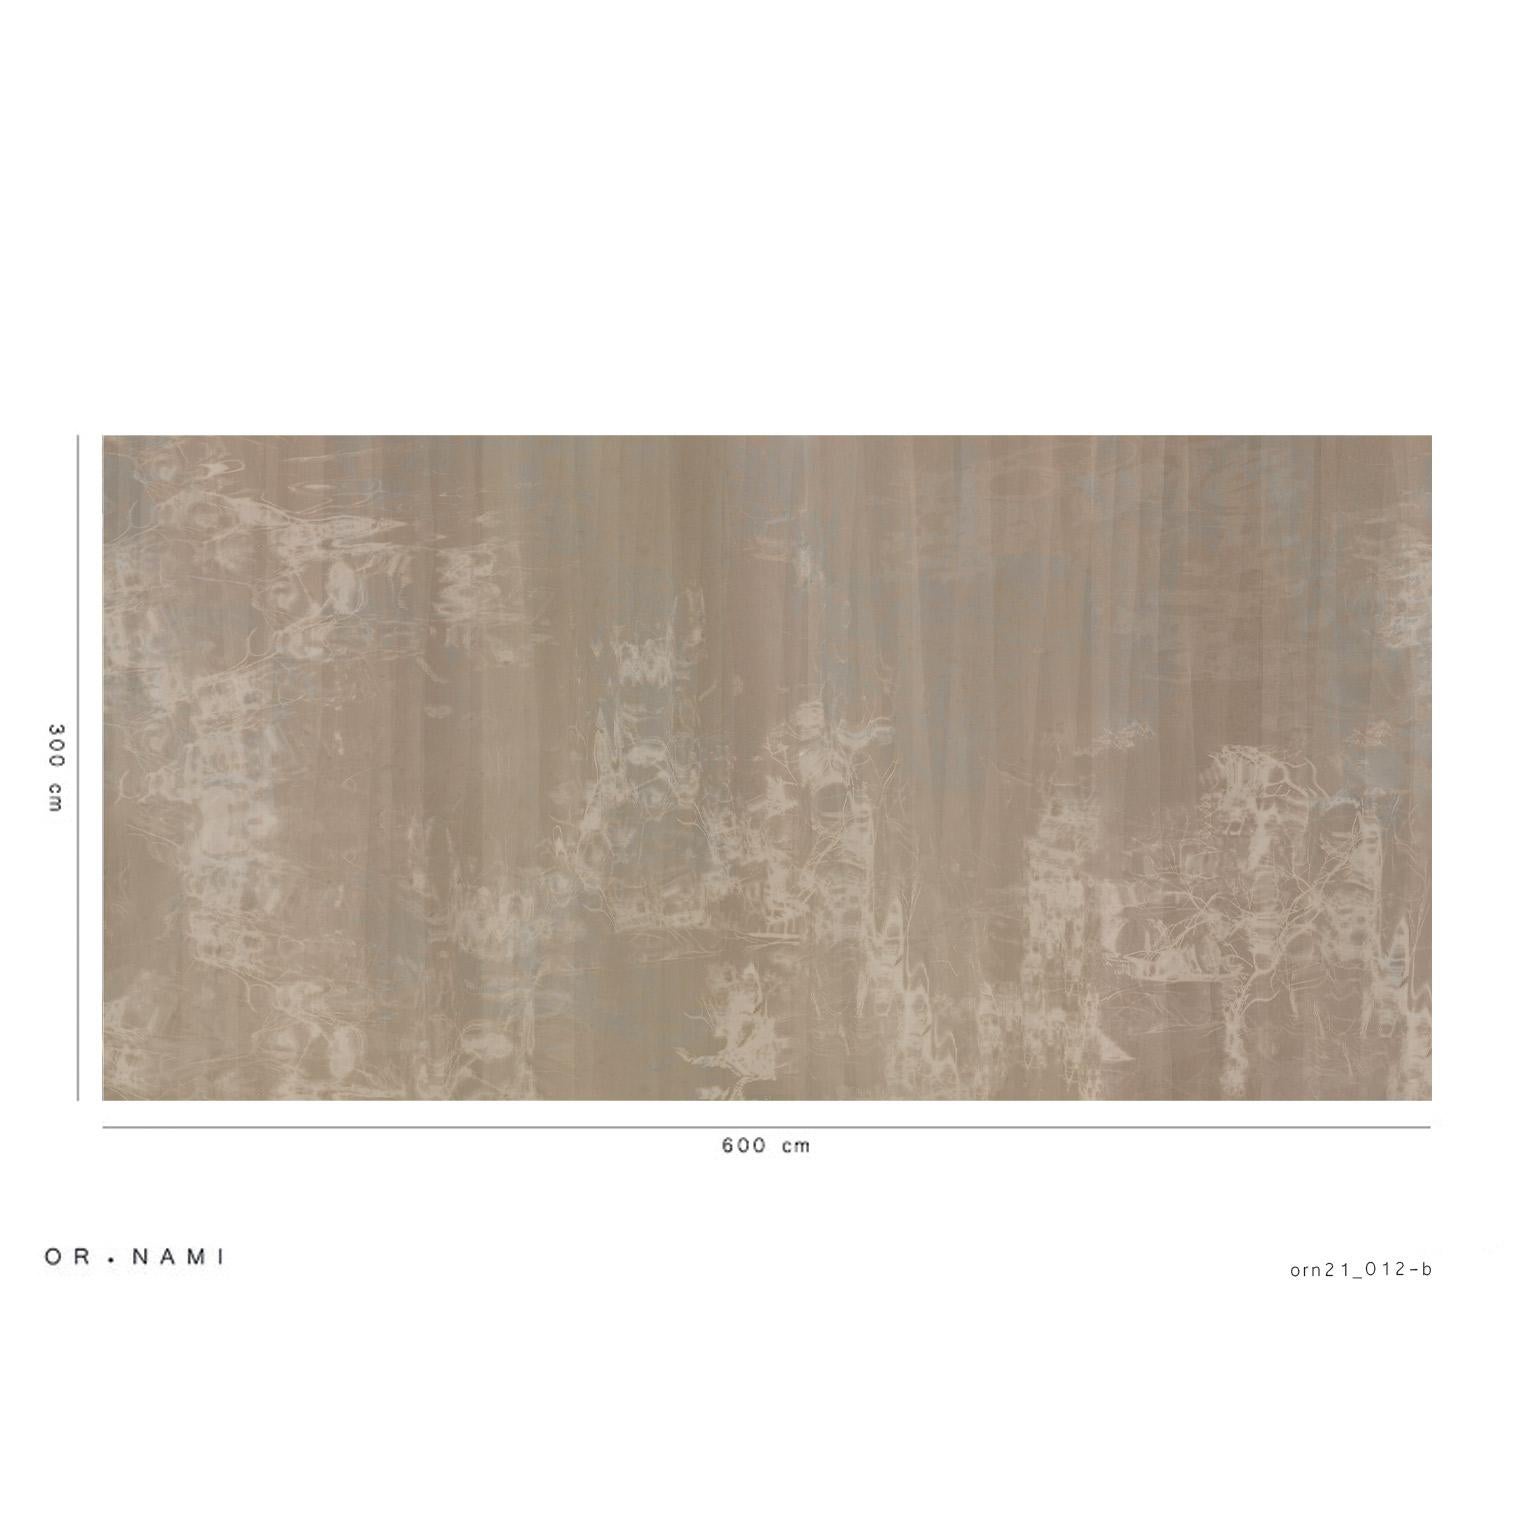 Contemporary Ornami Japan Water Nature Space Vinyl Wallpaper Made in Italy Digital Printing For Sale